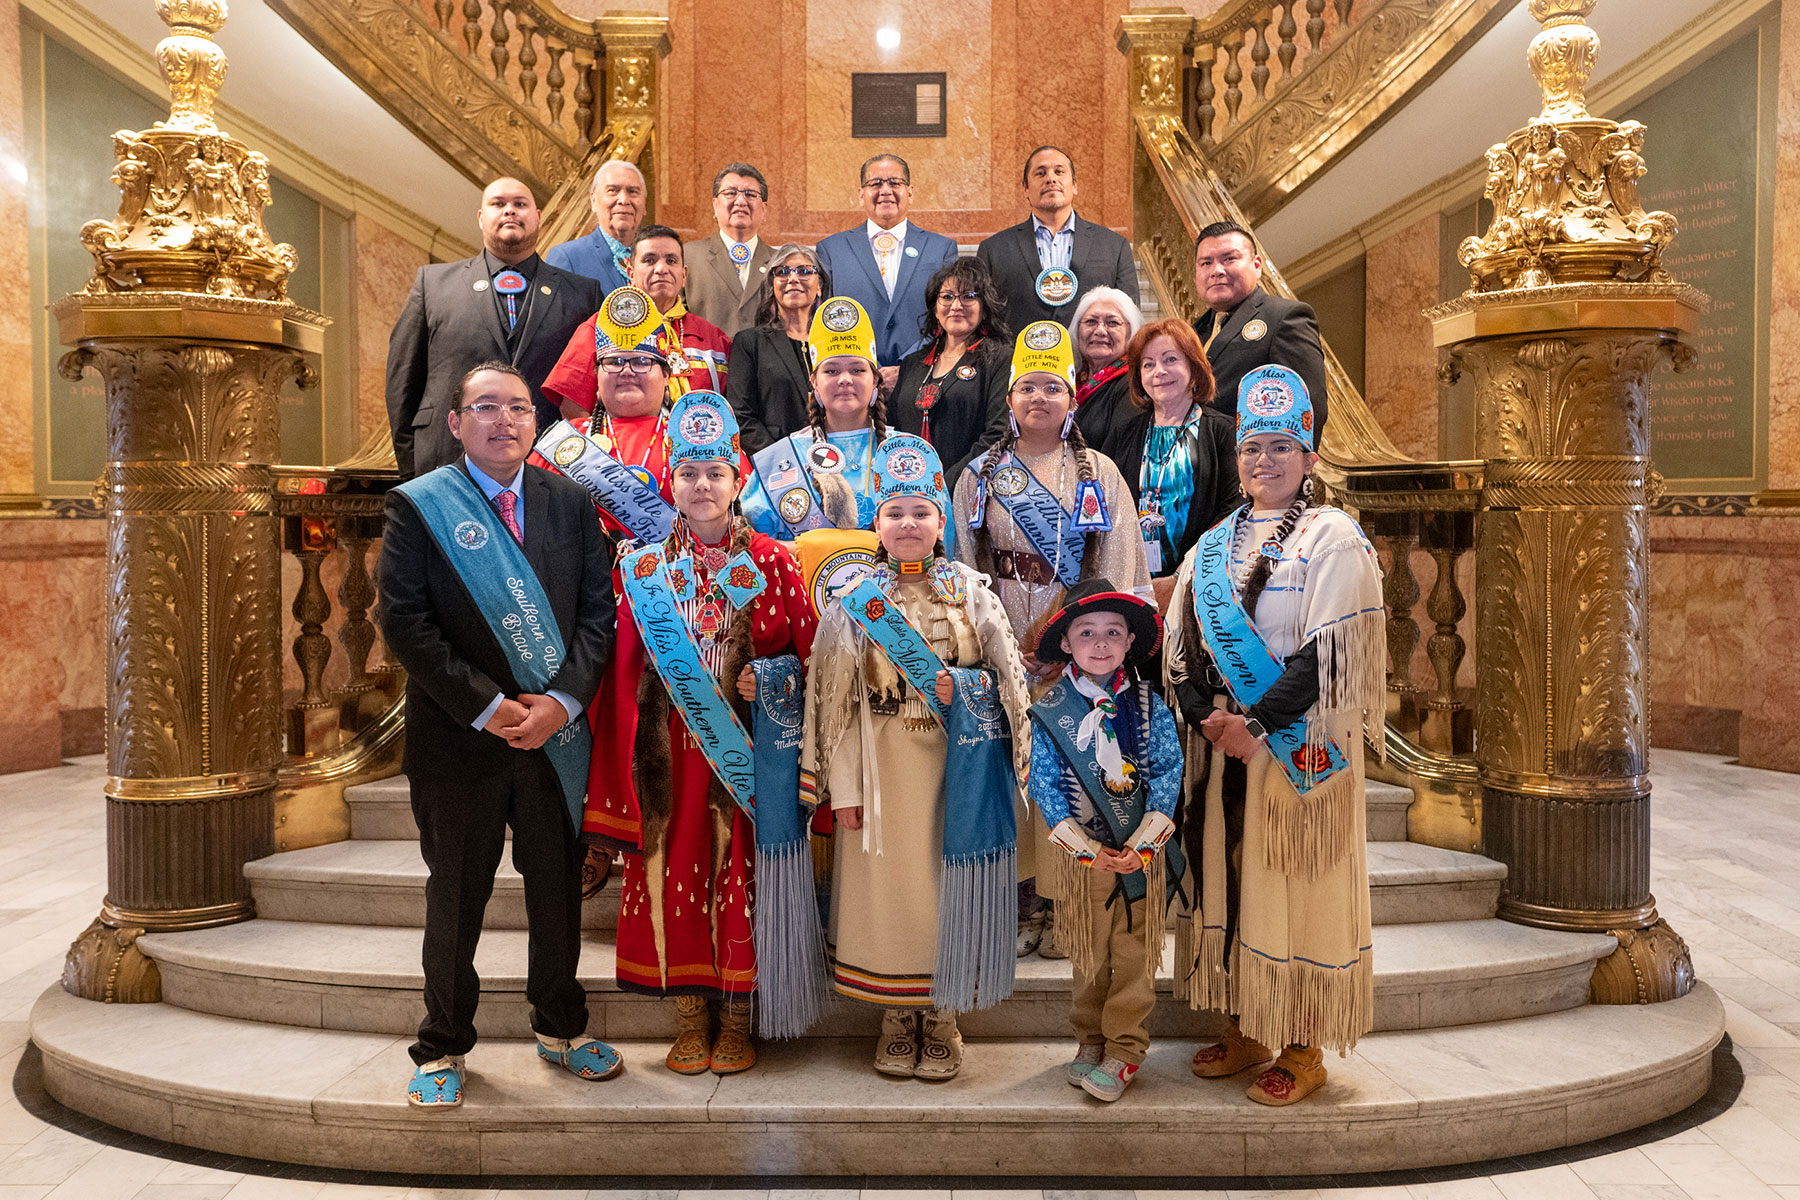 Tribal Council advocates for tribal interests at State Capitol